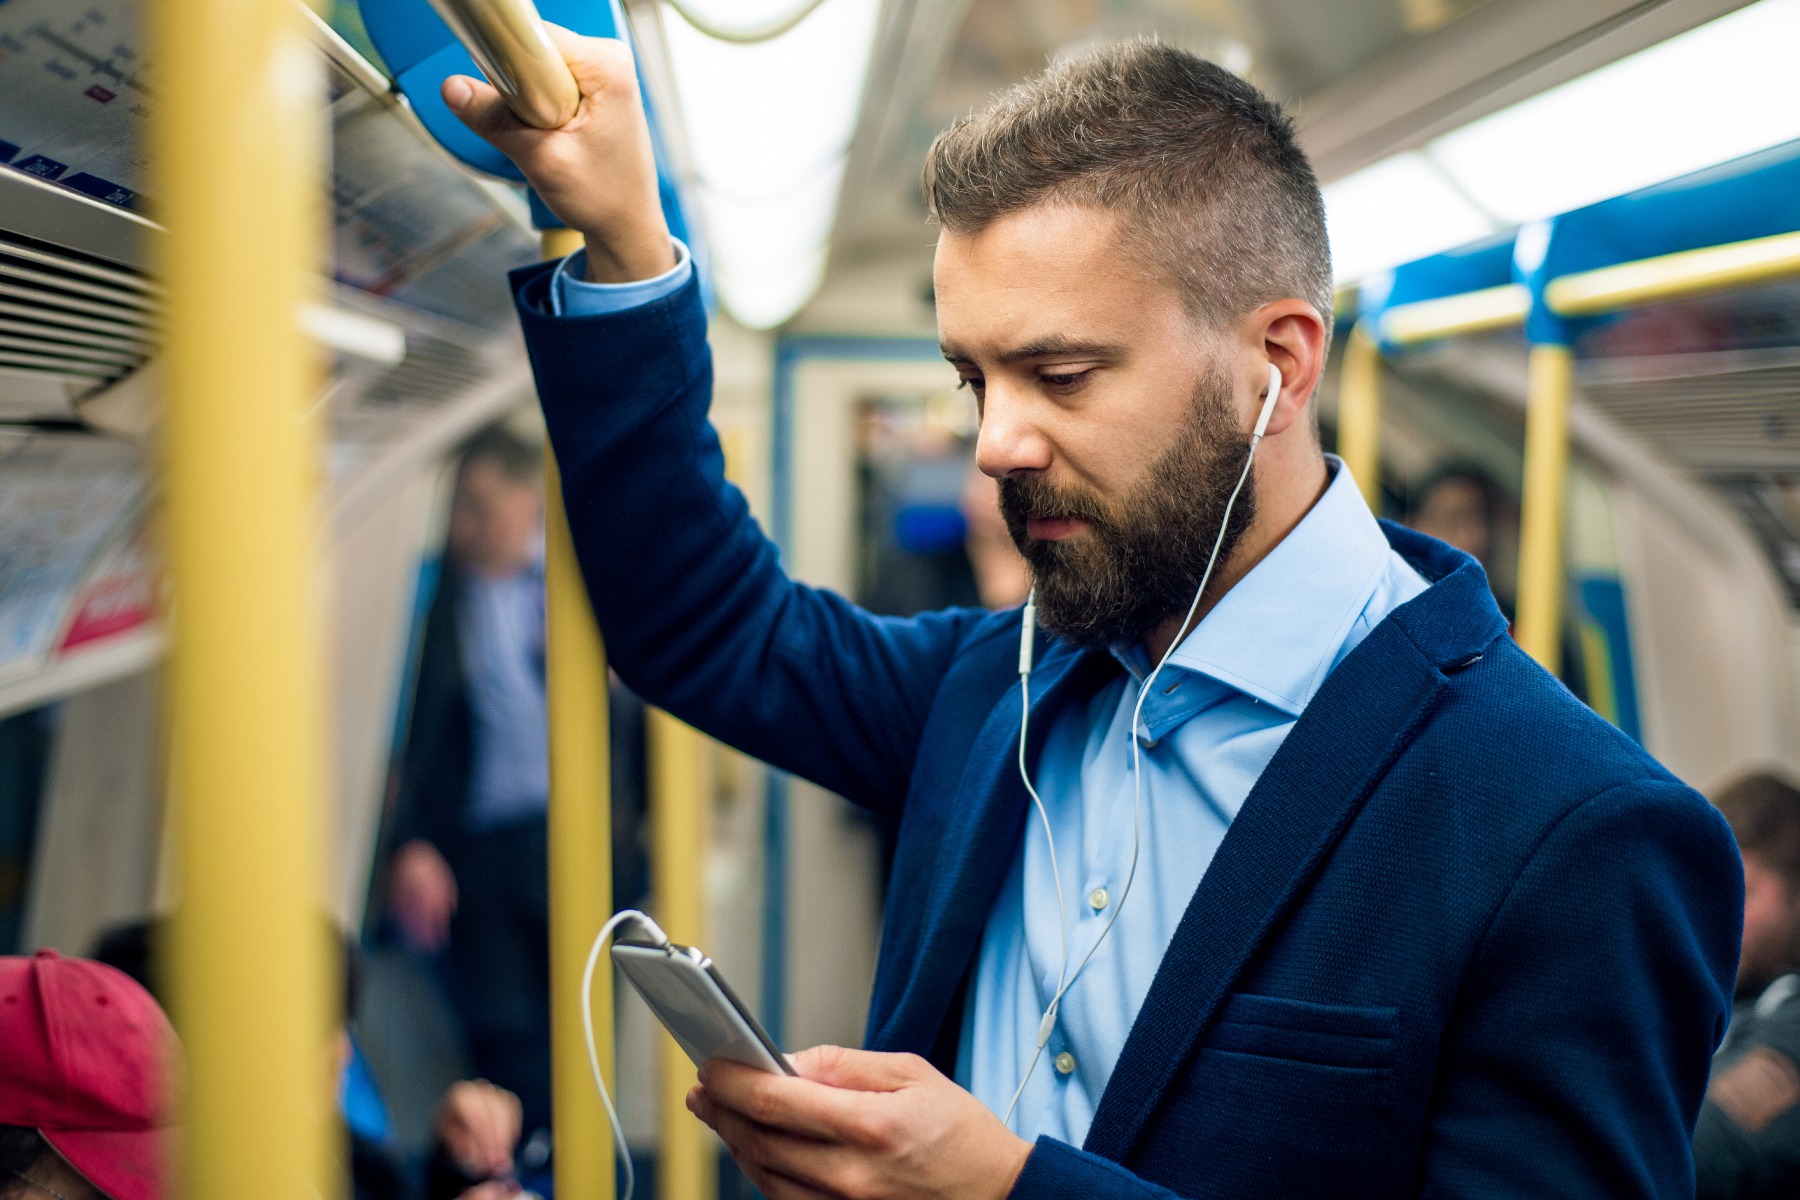 stock photo of a man using a mobile phone while standing in a London Underground train carriage